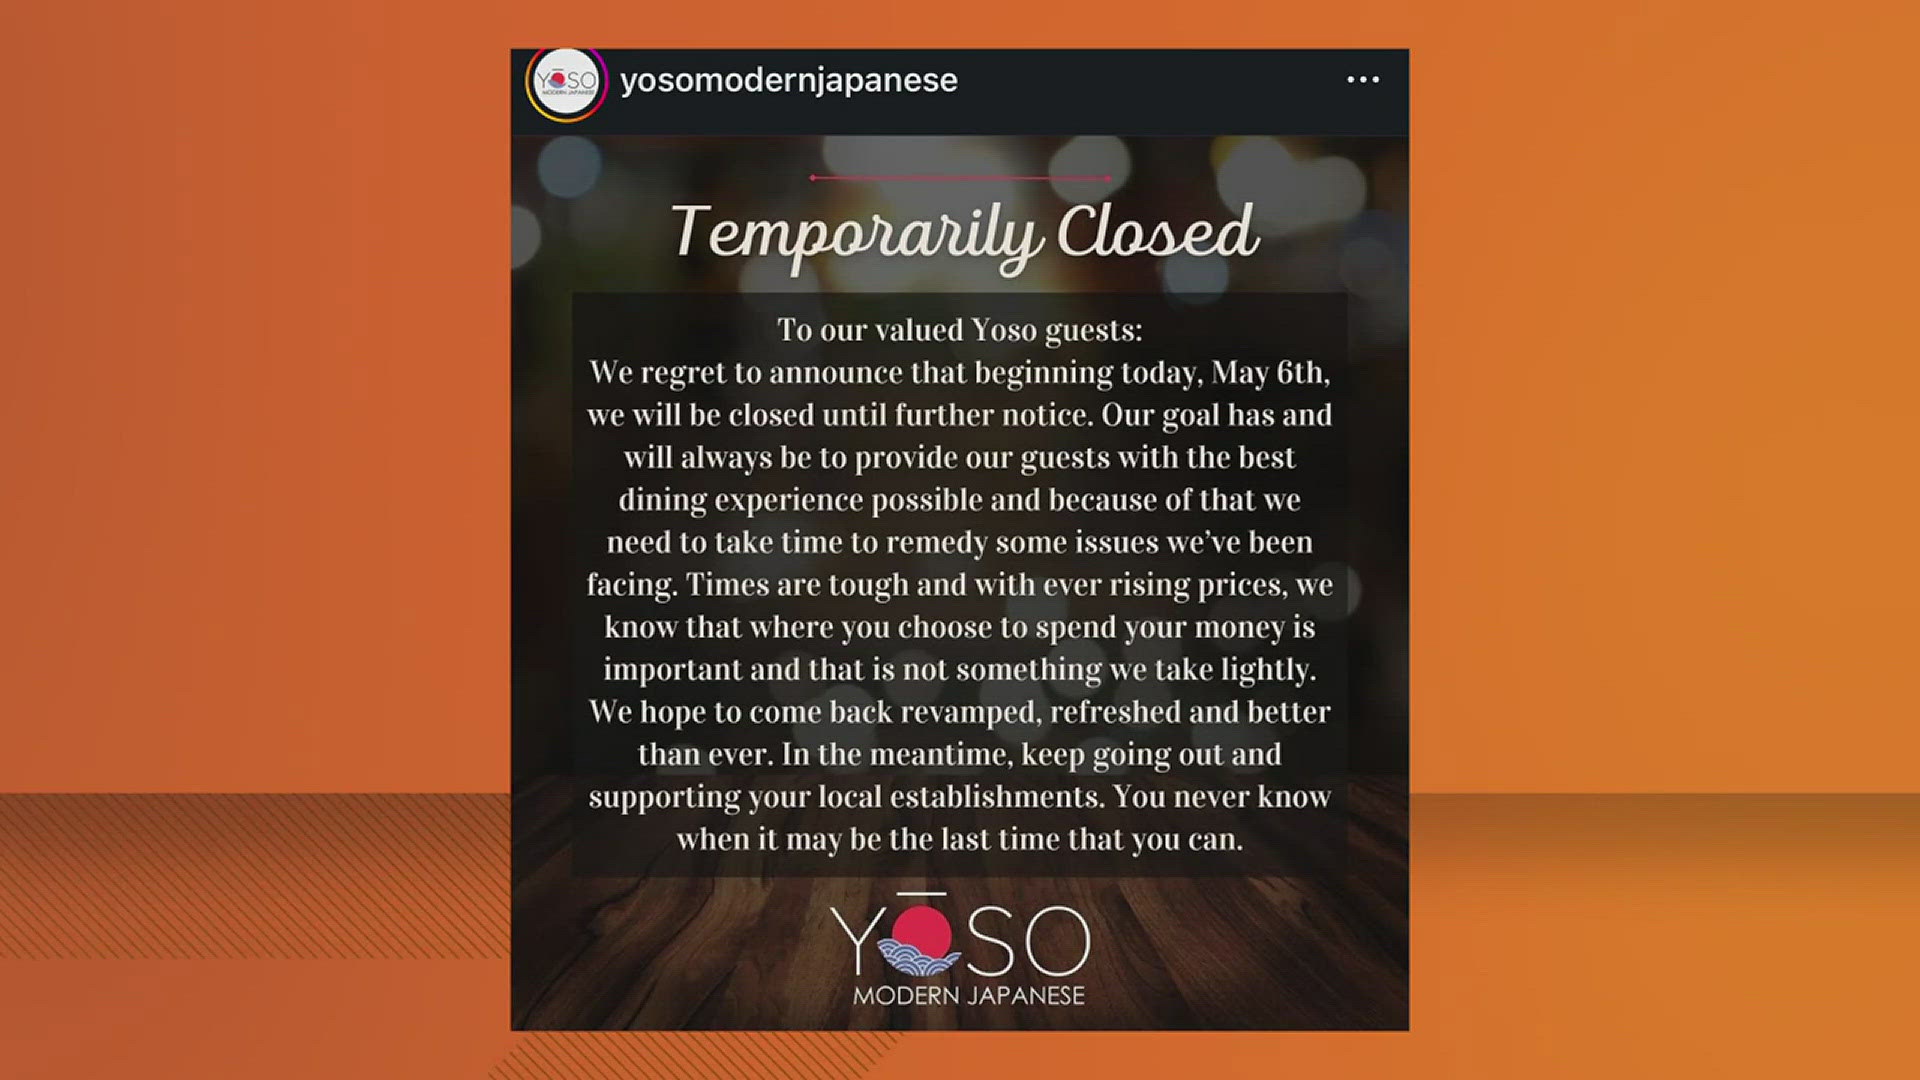 The Japanese restaurant made the announcement on Instagram Monday. It did not provide a timeframe on when it hopes to reopen.